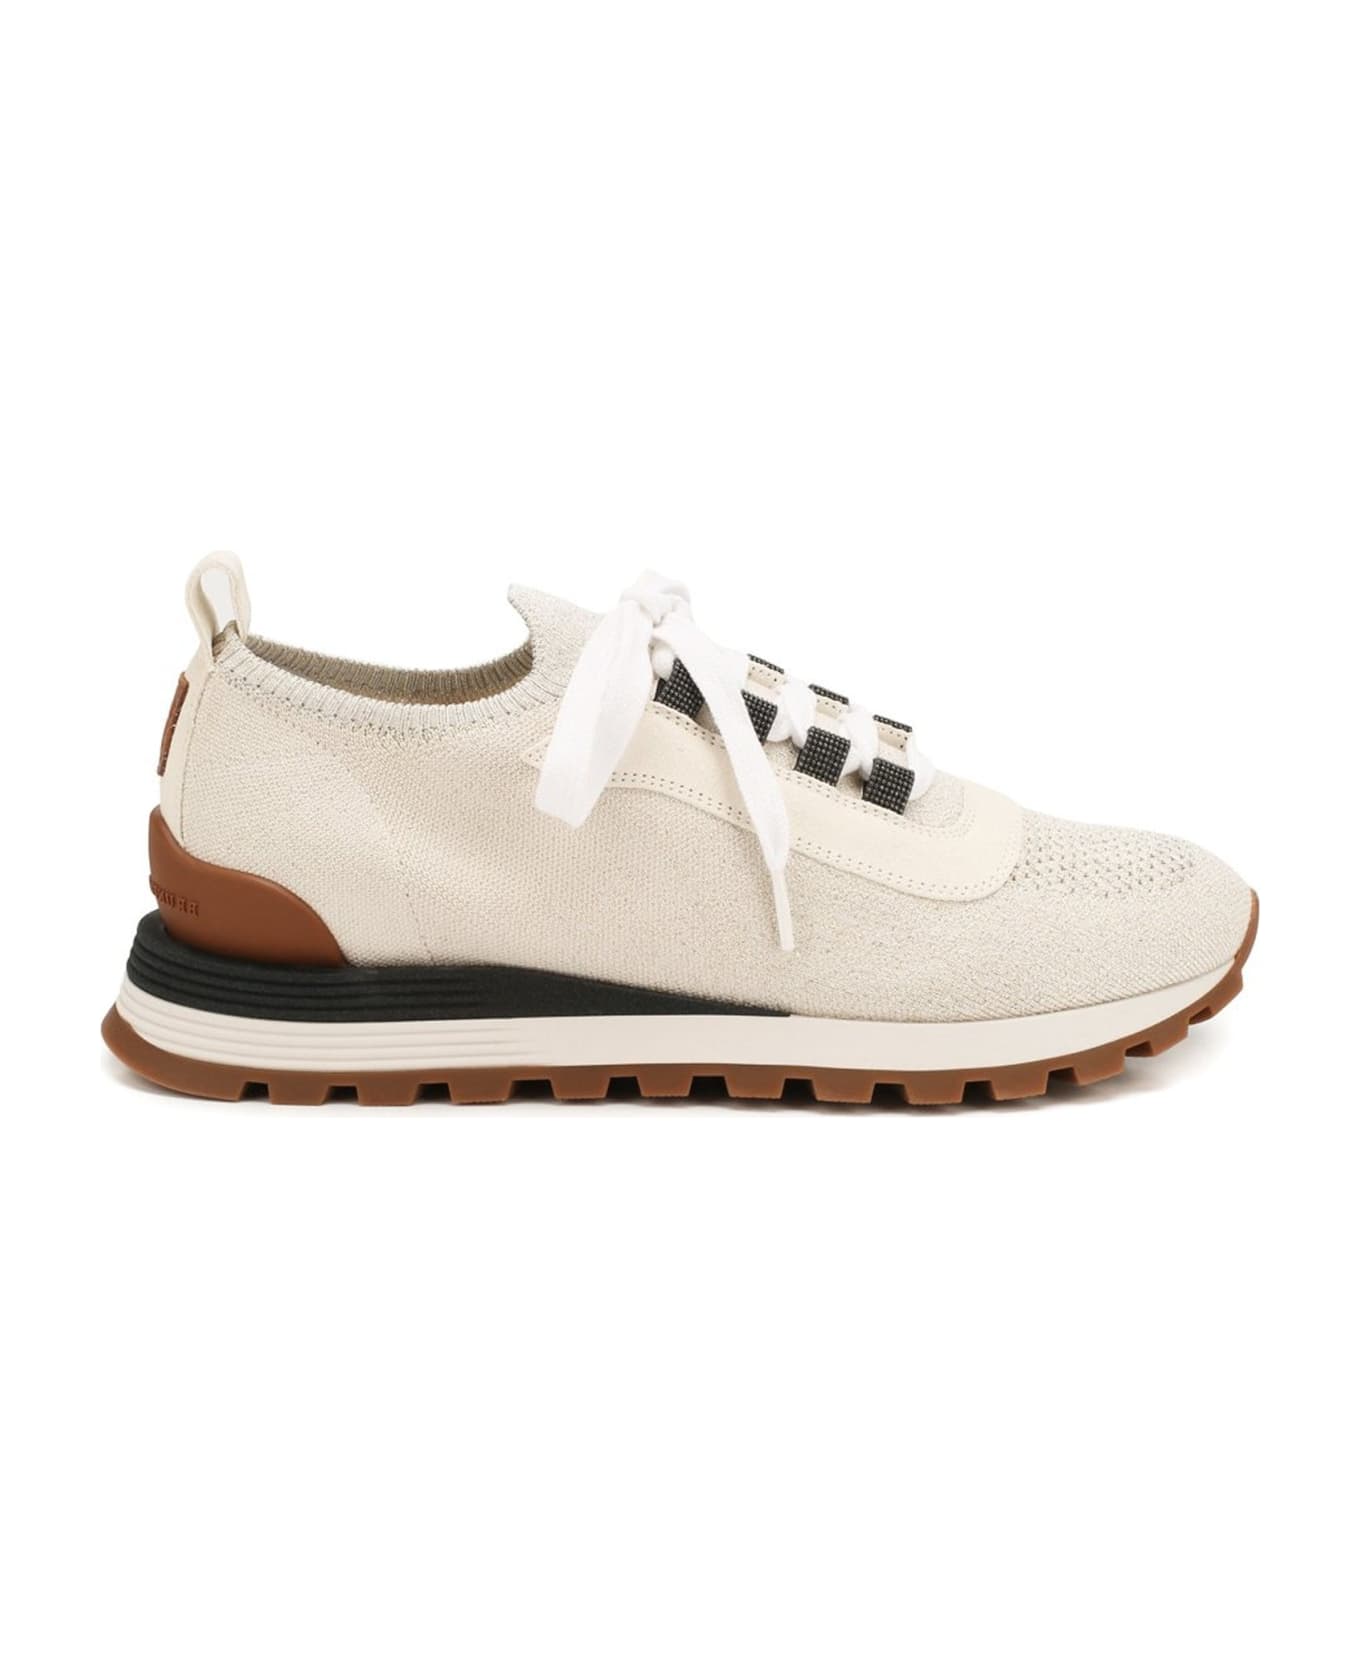 Brunello Cucinelli Lace-up Sneakers - Beige スニーカー